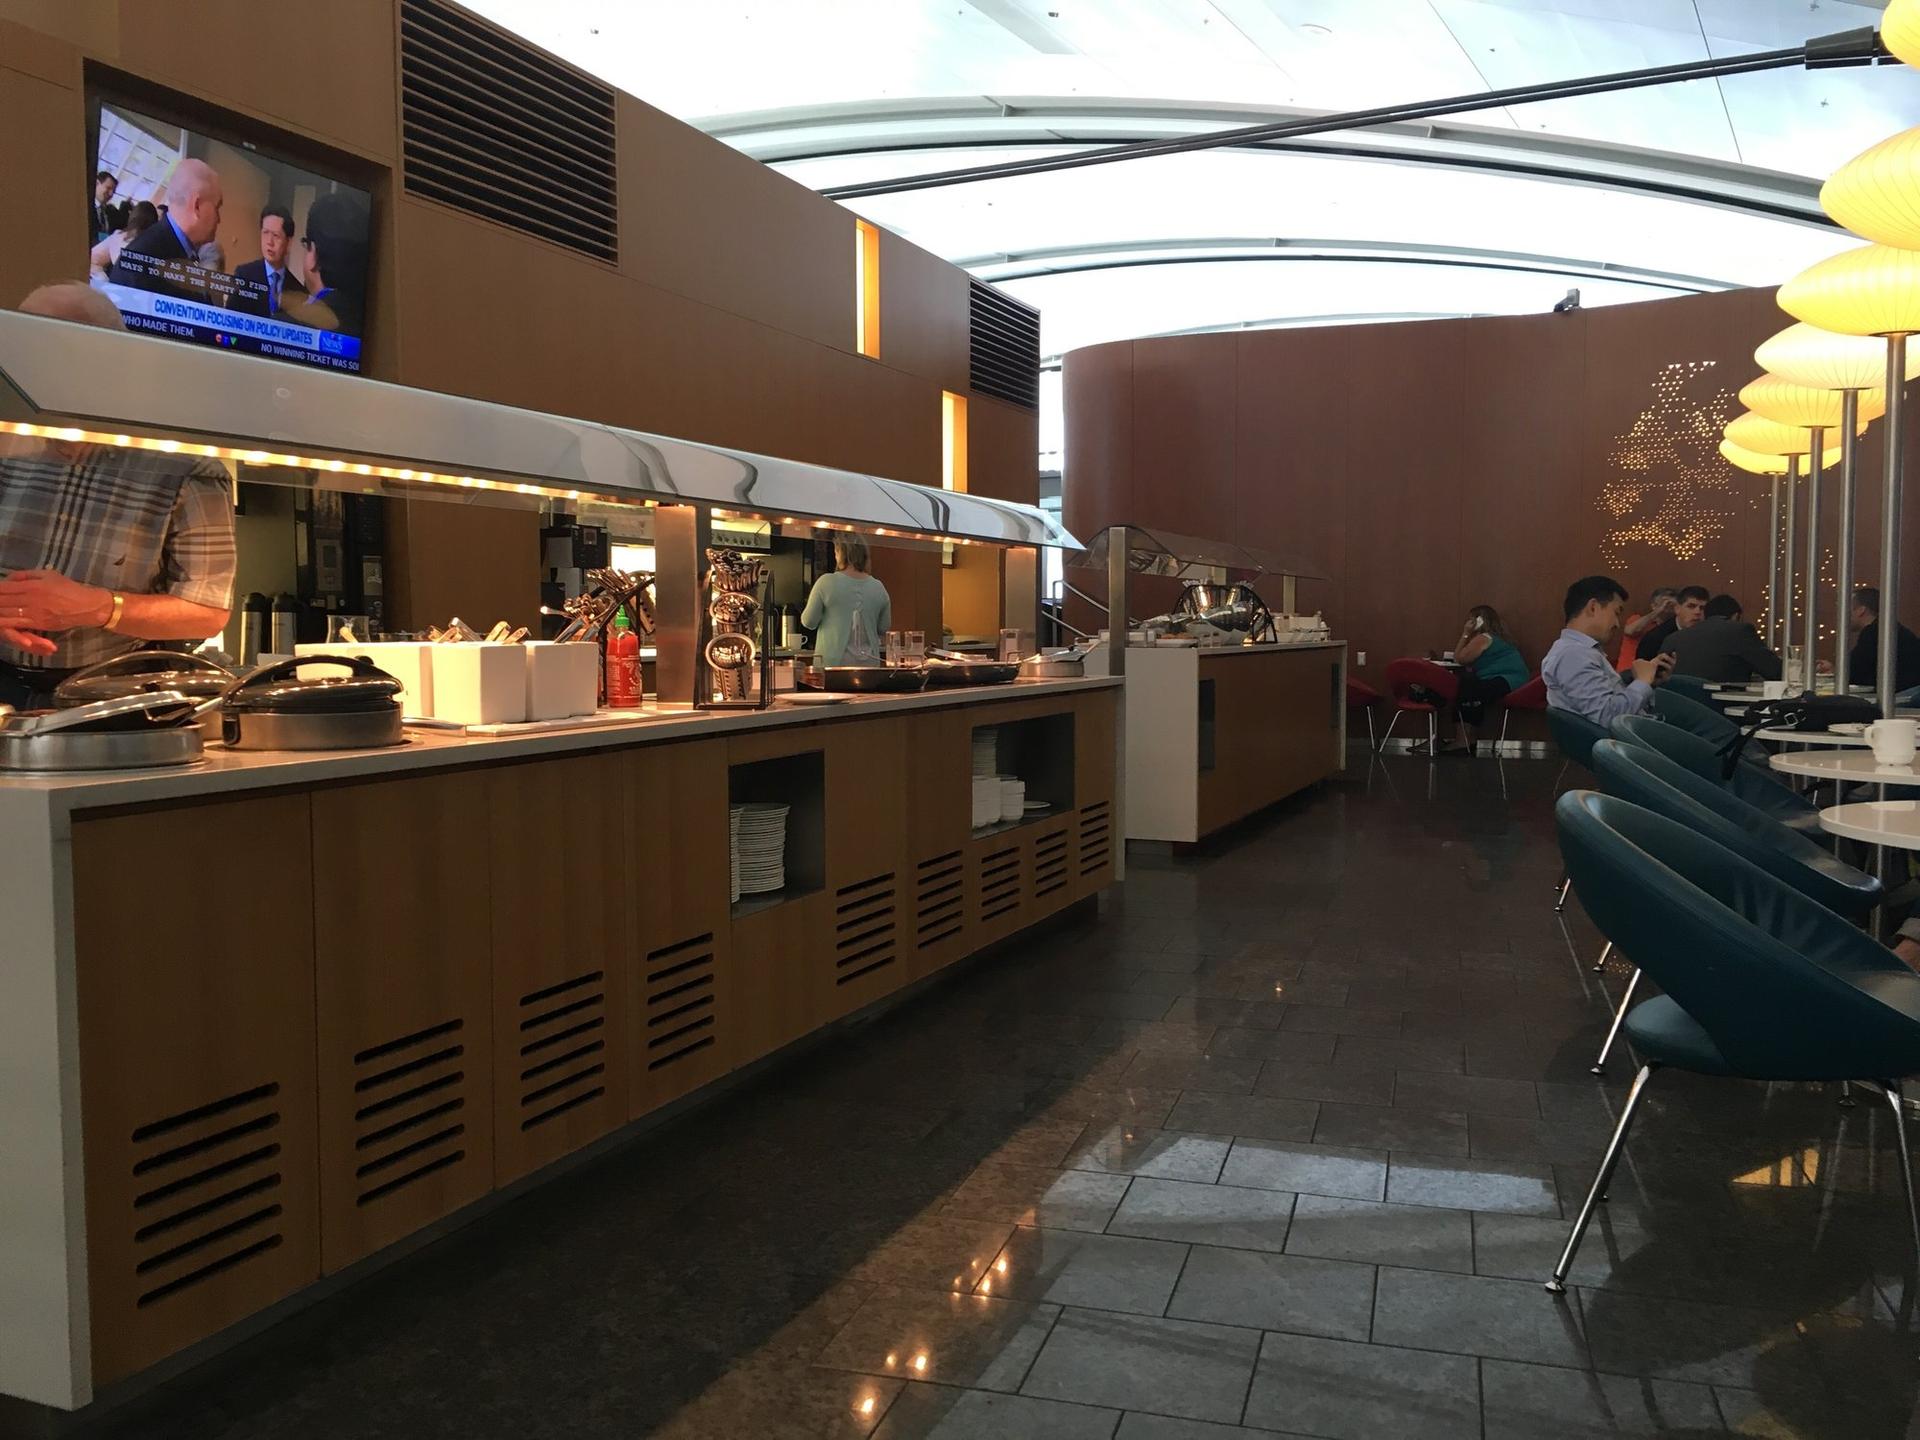 Air Canada Maple Leaf Lounge image 19 of 27